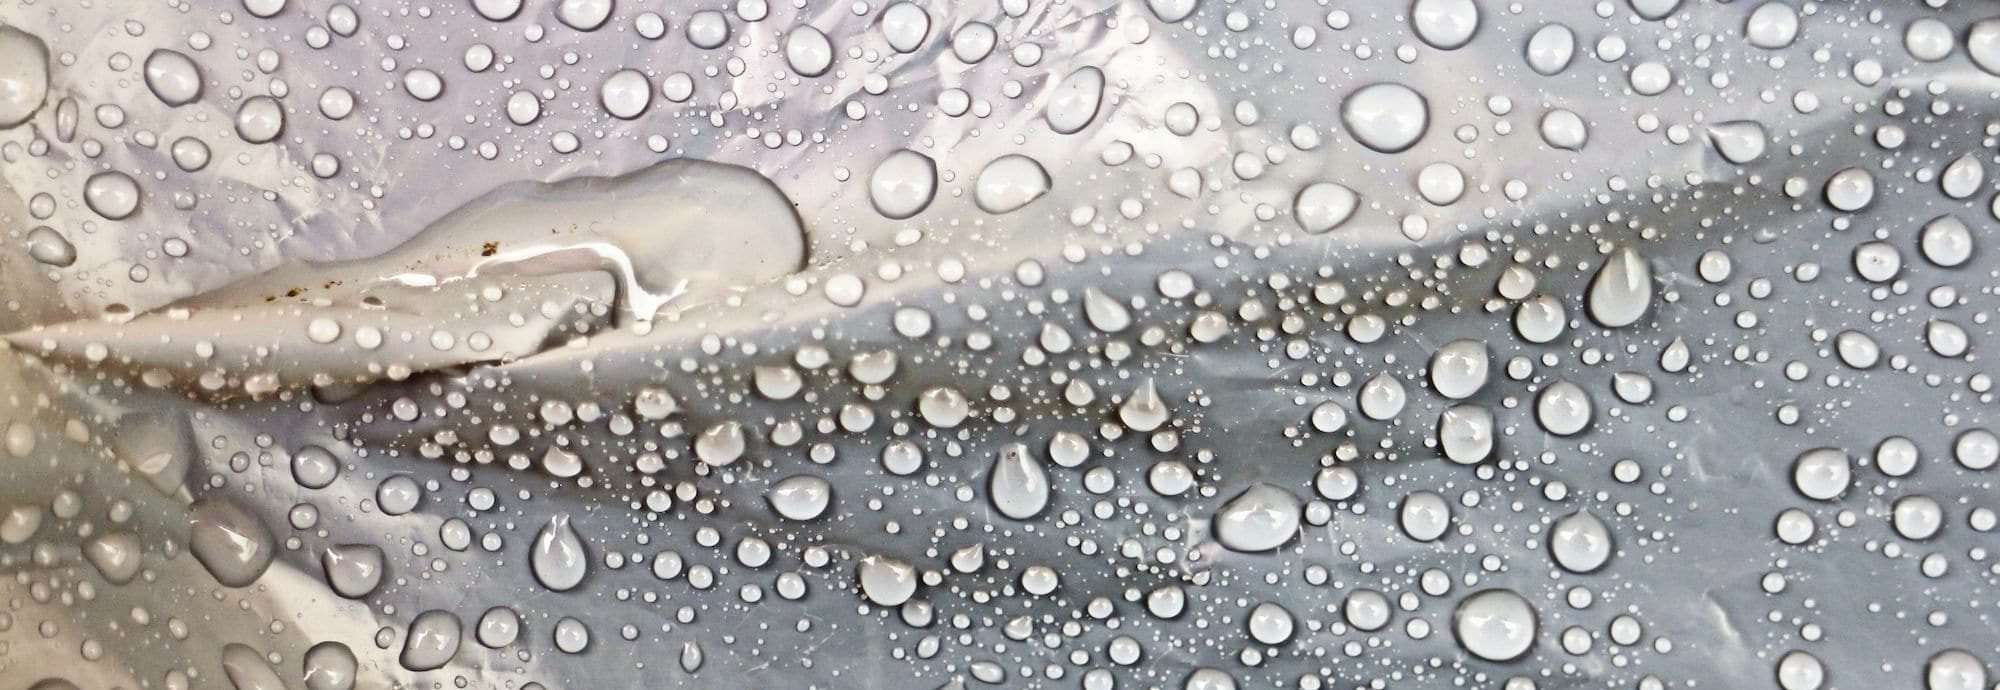 Drops of water on plastic